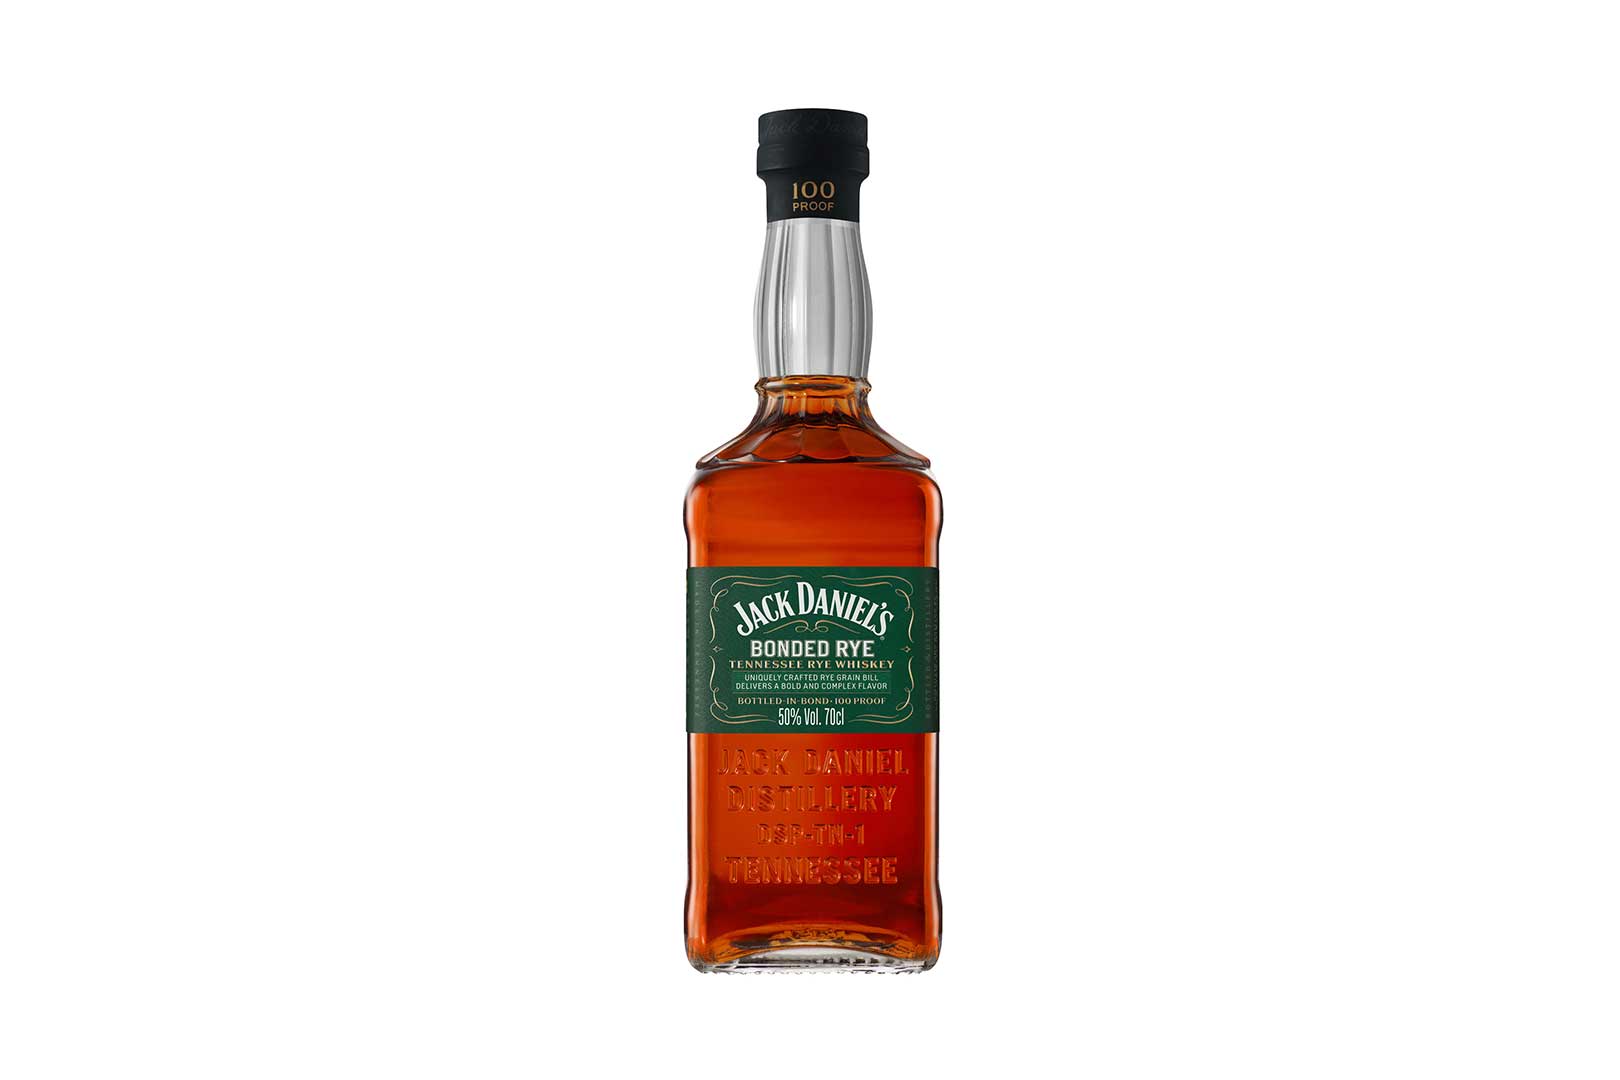 You are currently viewing Jack Daniel’s Bonded Rye